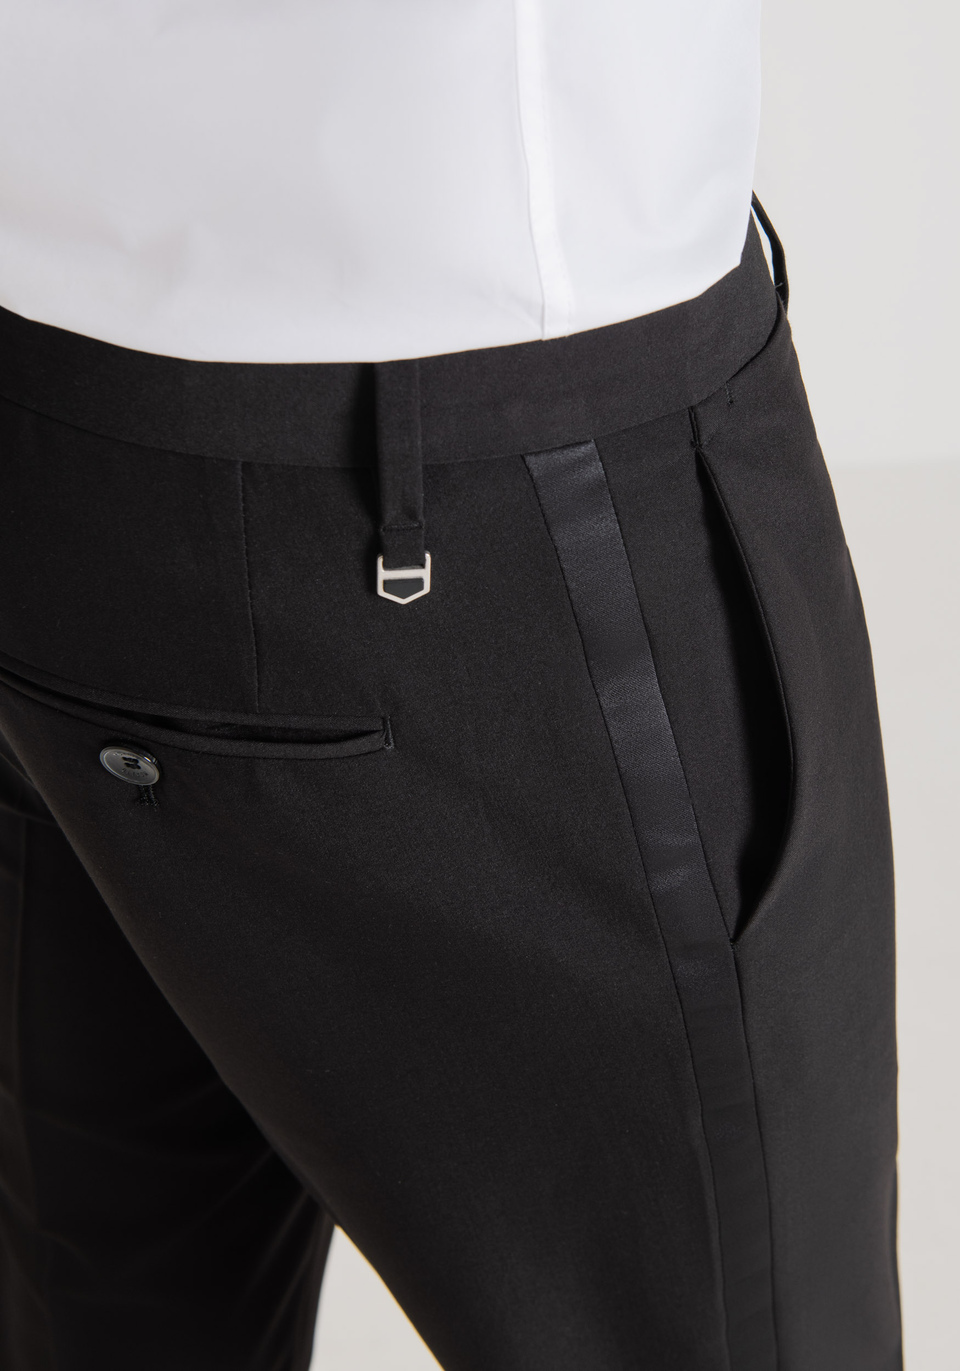 "NINA" SLIM FIT TROUSERS IN STRETCH VISCOSE BLEND WITH SATIN DETAILS - Antony Morato Online Shop